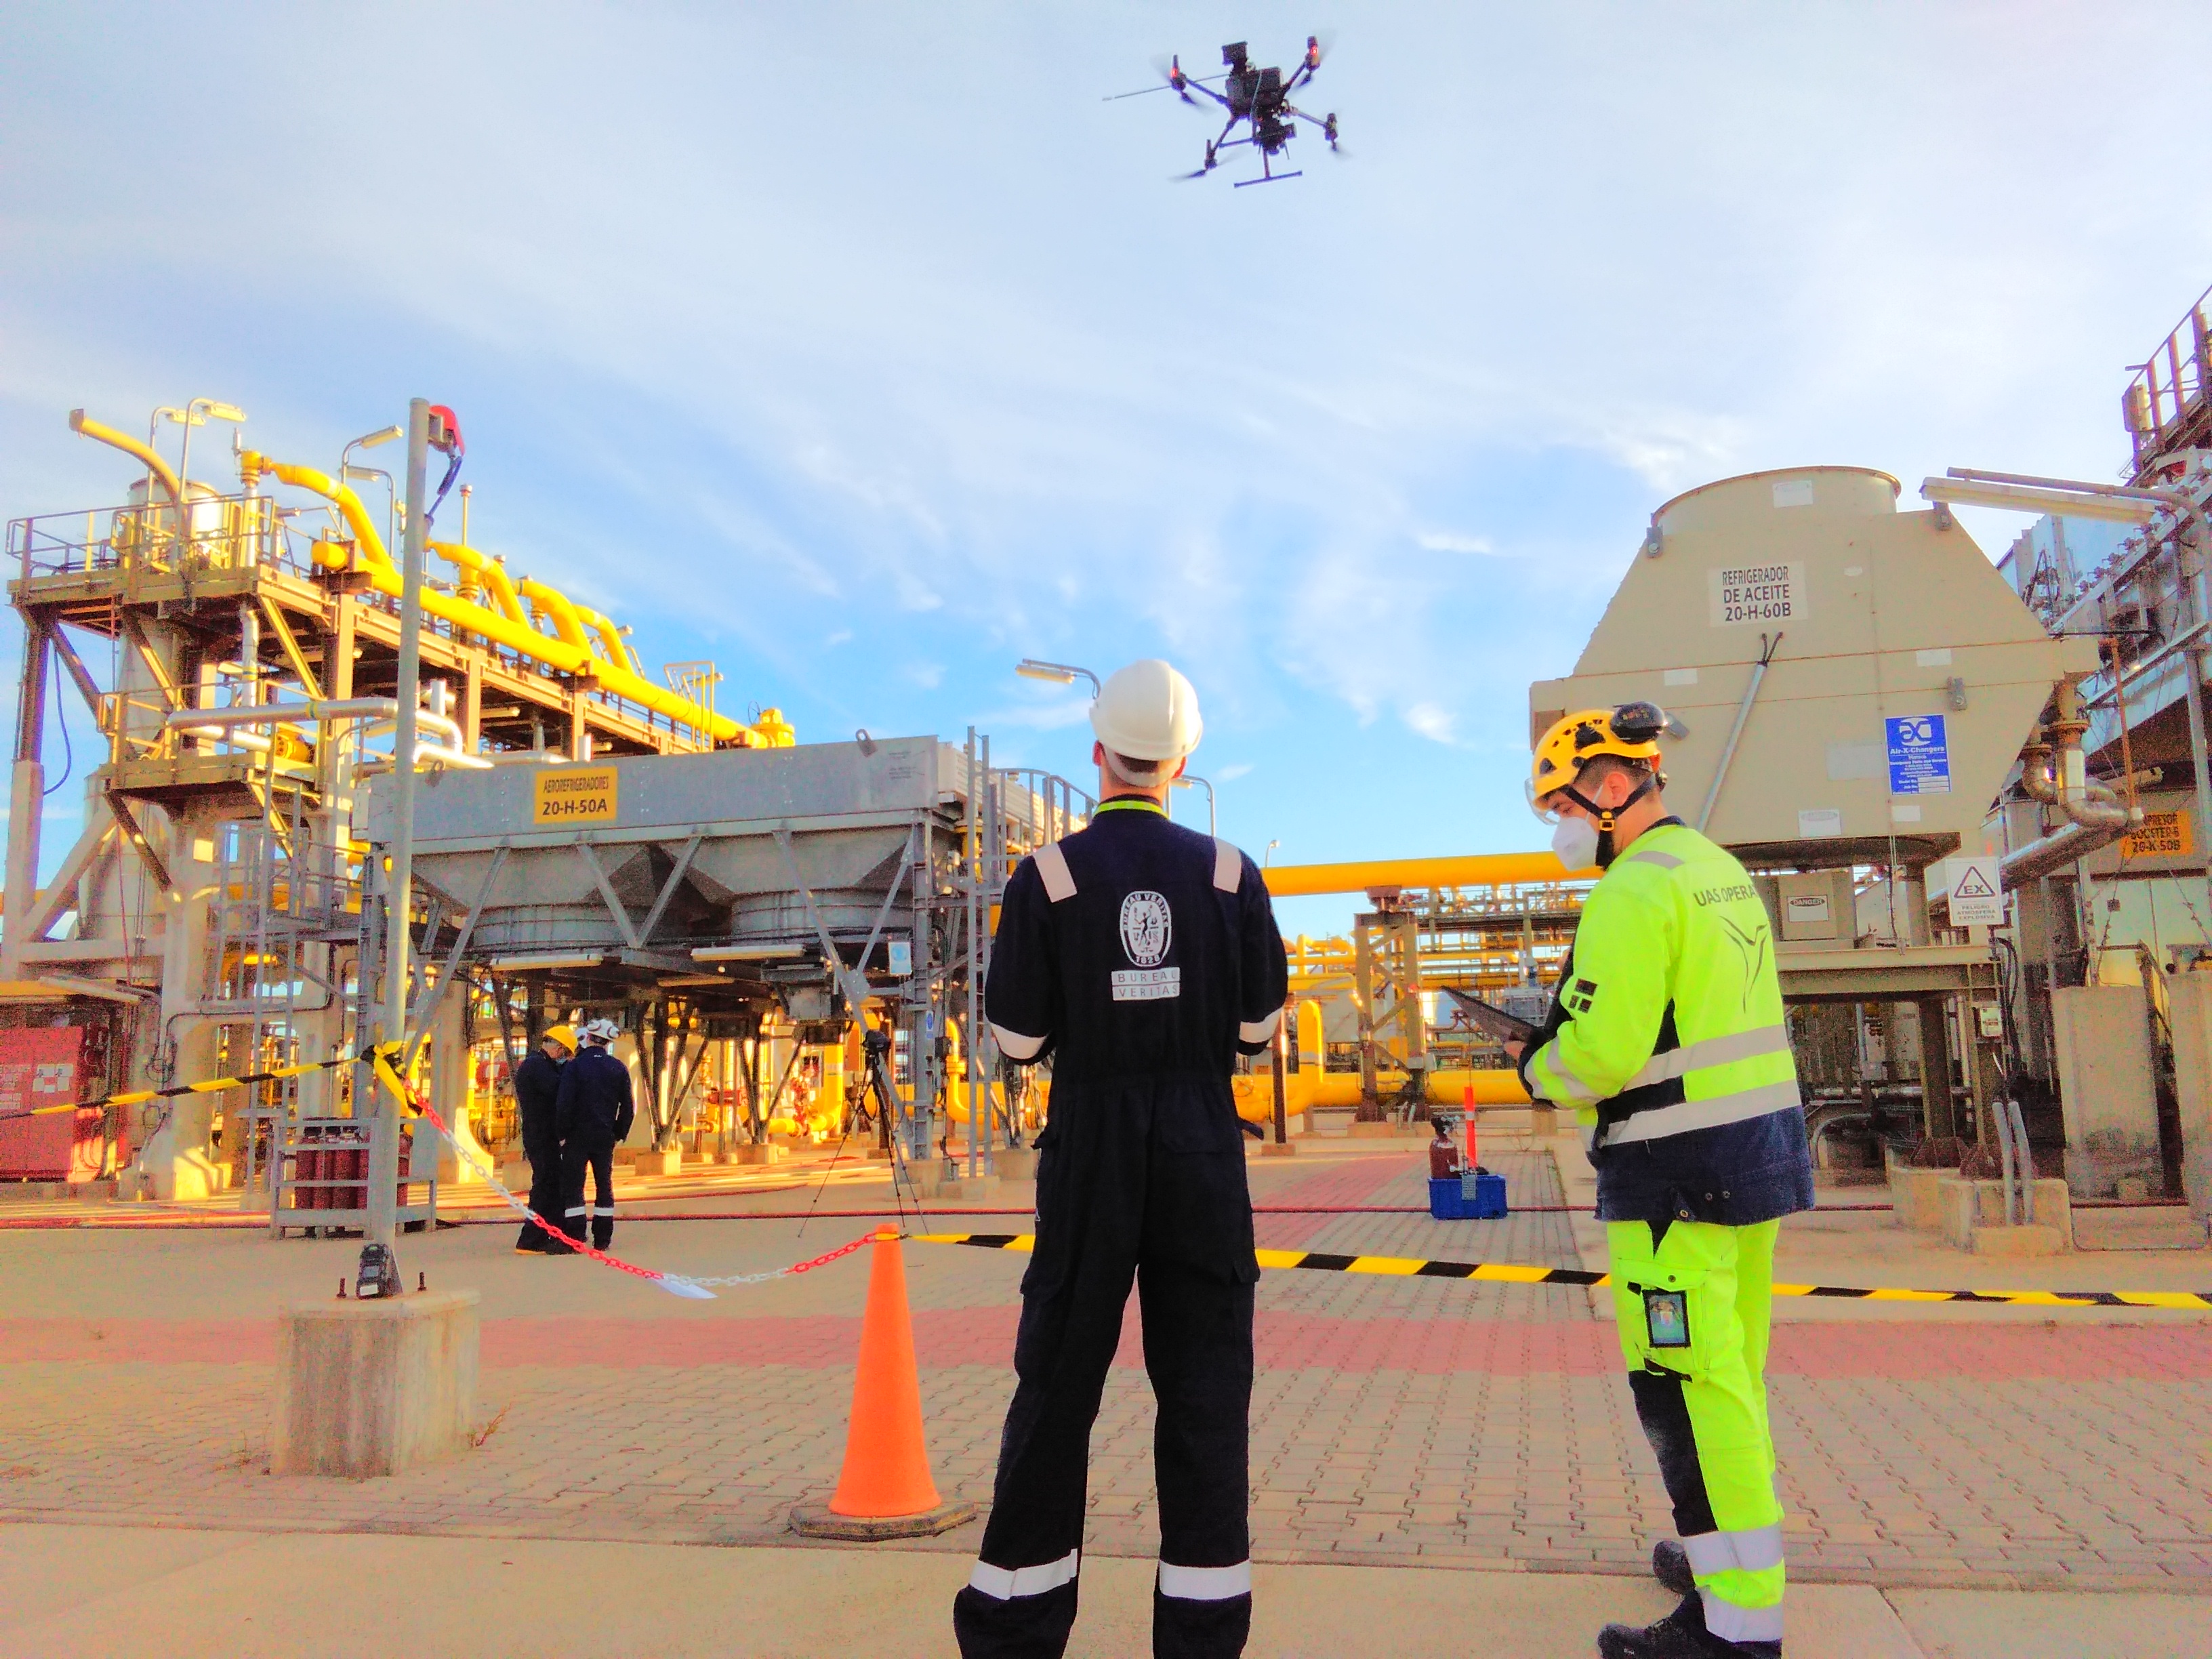 Researchers performing drone tests on Enagás infrastructure